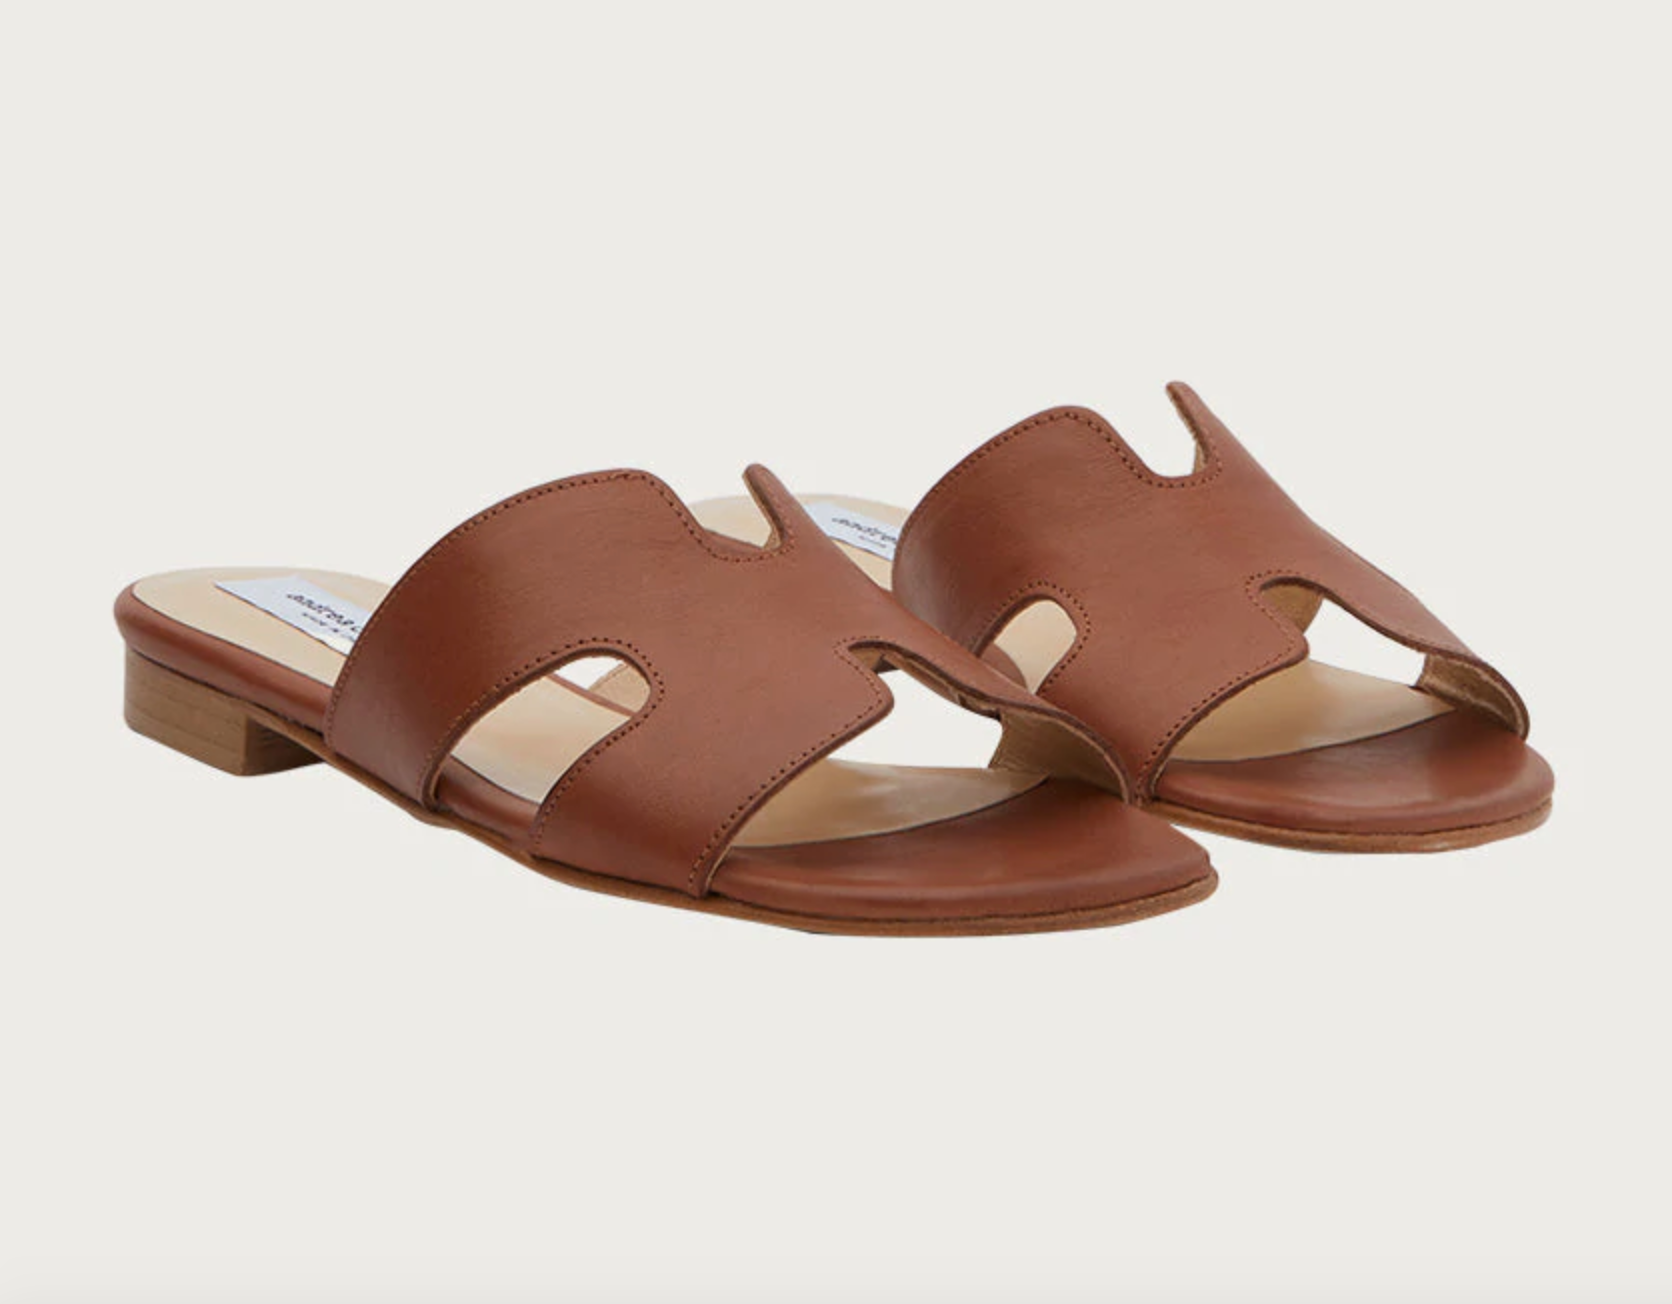 The sandals in a dark tan color with a small heel